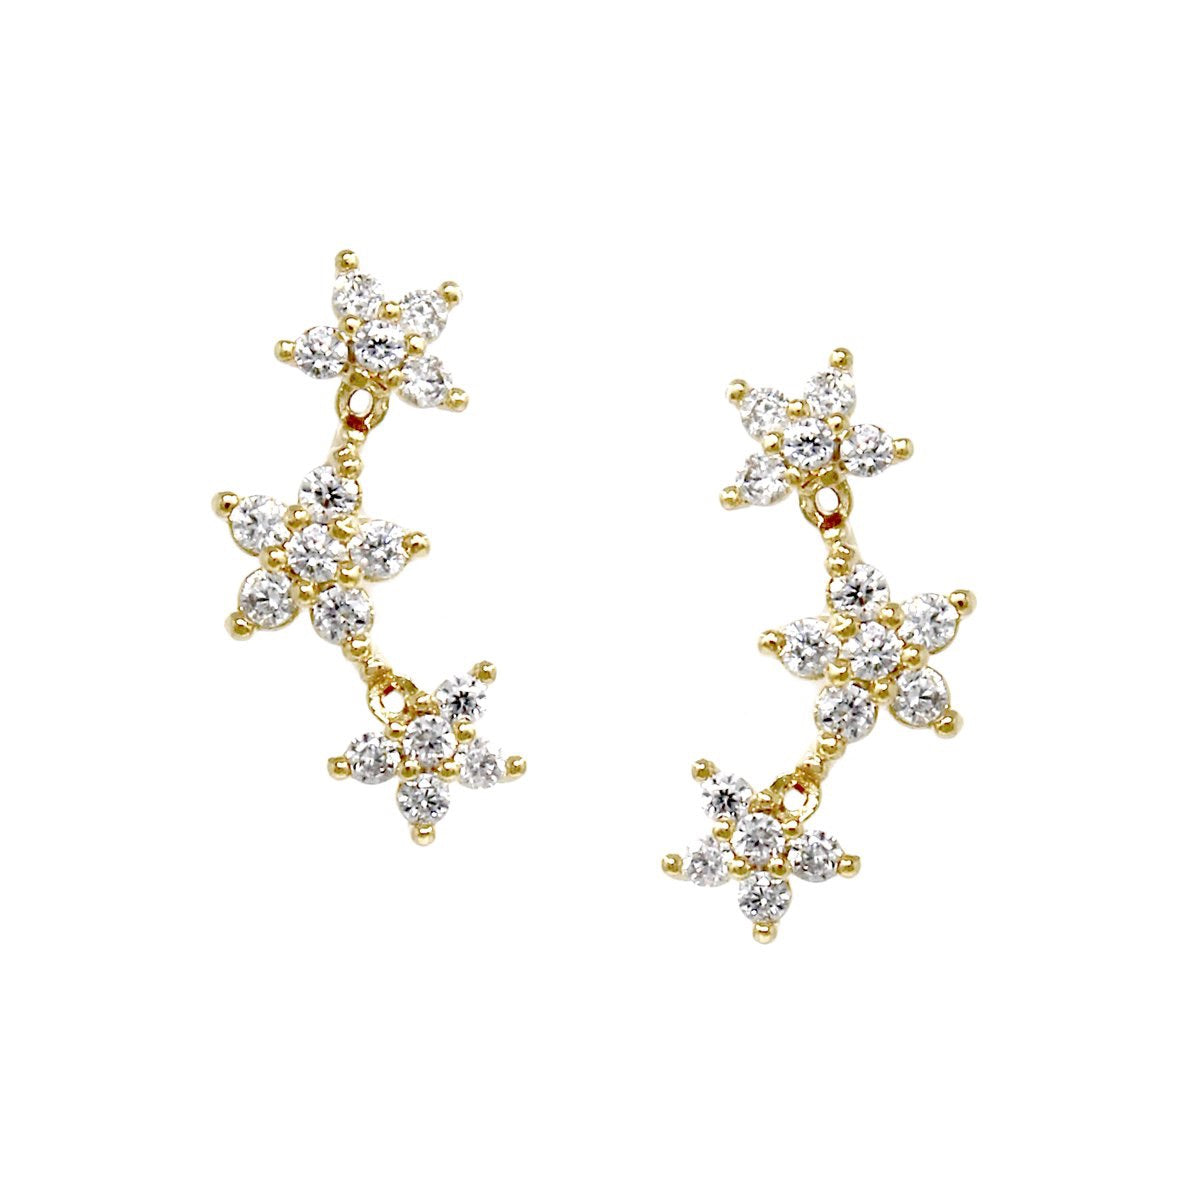 BITZ CZ PAVE Triple Star Gold Dipped Stud Earrings - CRAWLERS - 2 COLOR OPTIONS